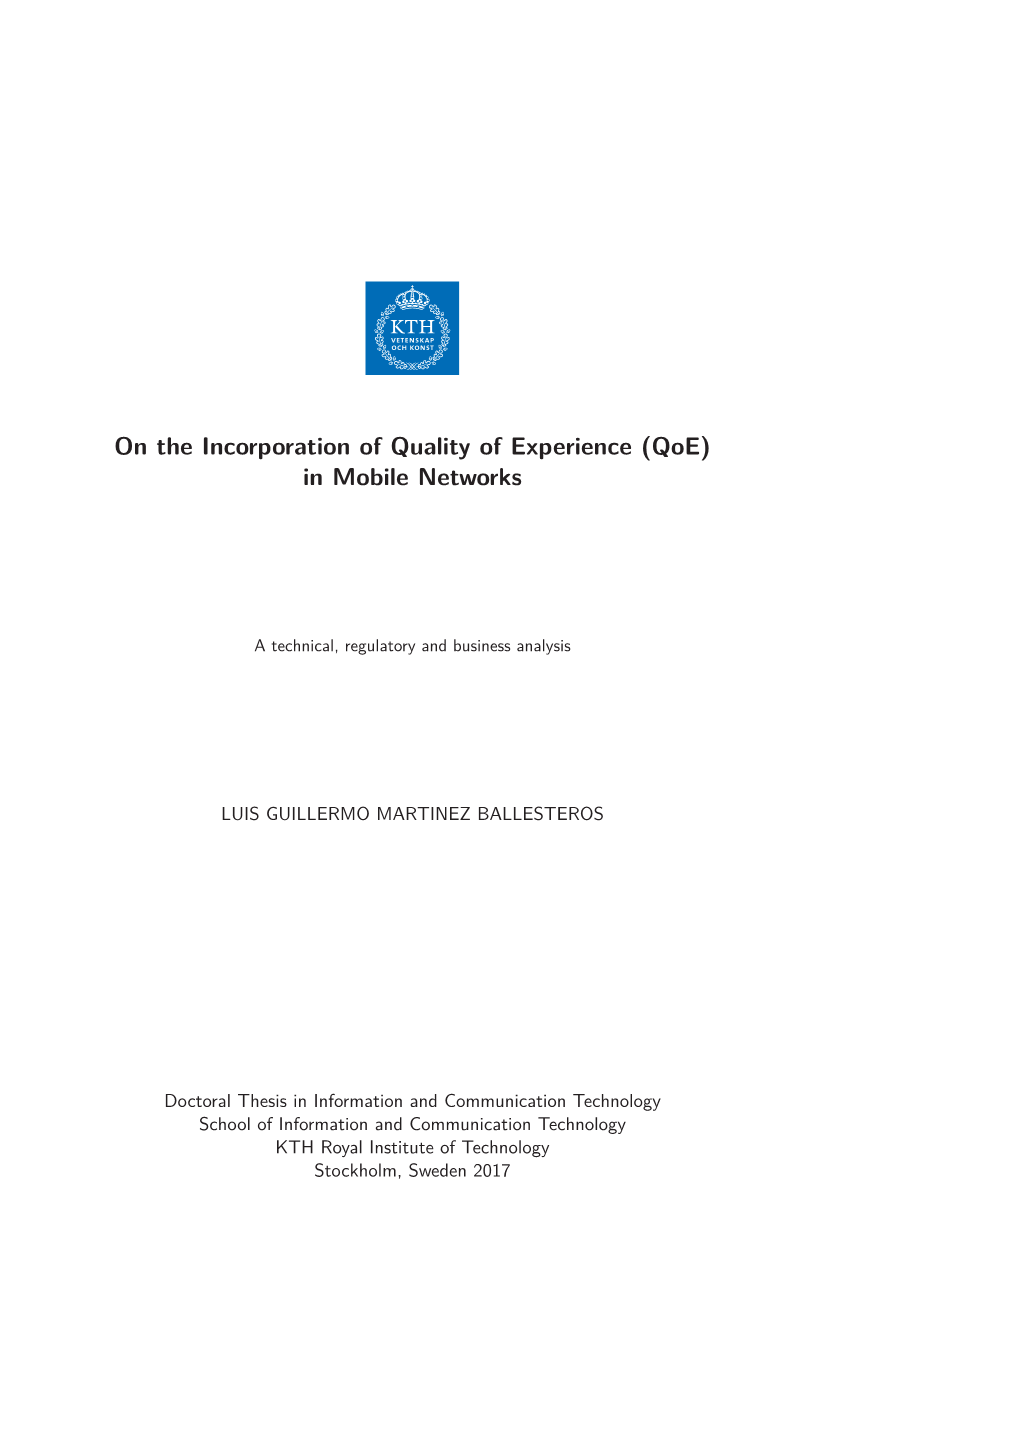 On the Incorporation of Quality of Experience (Qoe) in Mobile Networks